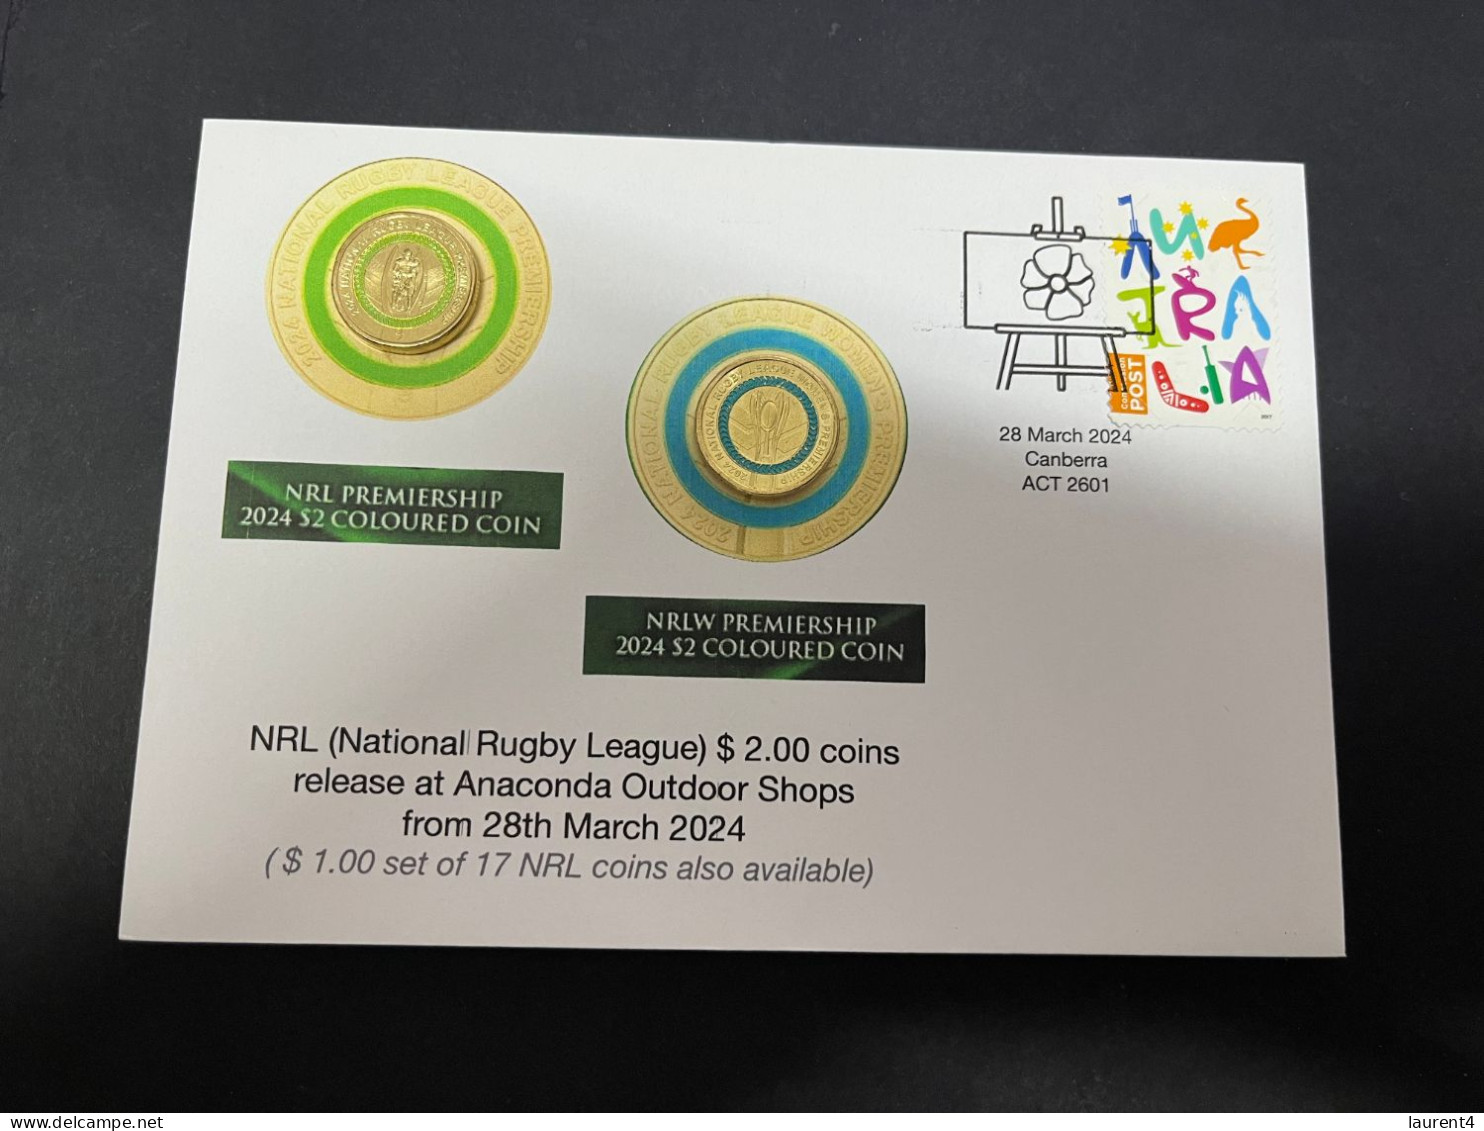 29-3-2024 (4 Y 23) Australian New $ 2.00 Coin (NRL Premiership Men & Women) Released 28-3-2024 (2 X Coins On Cover) - 2 Dollars